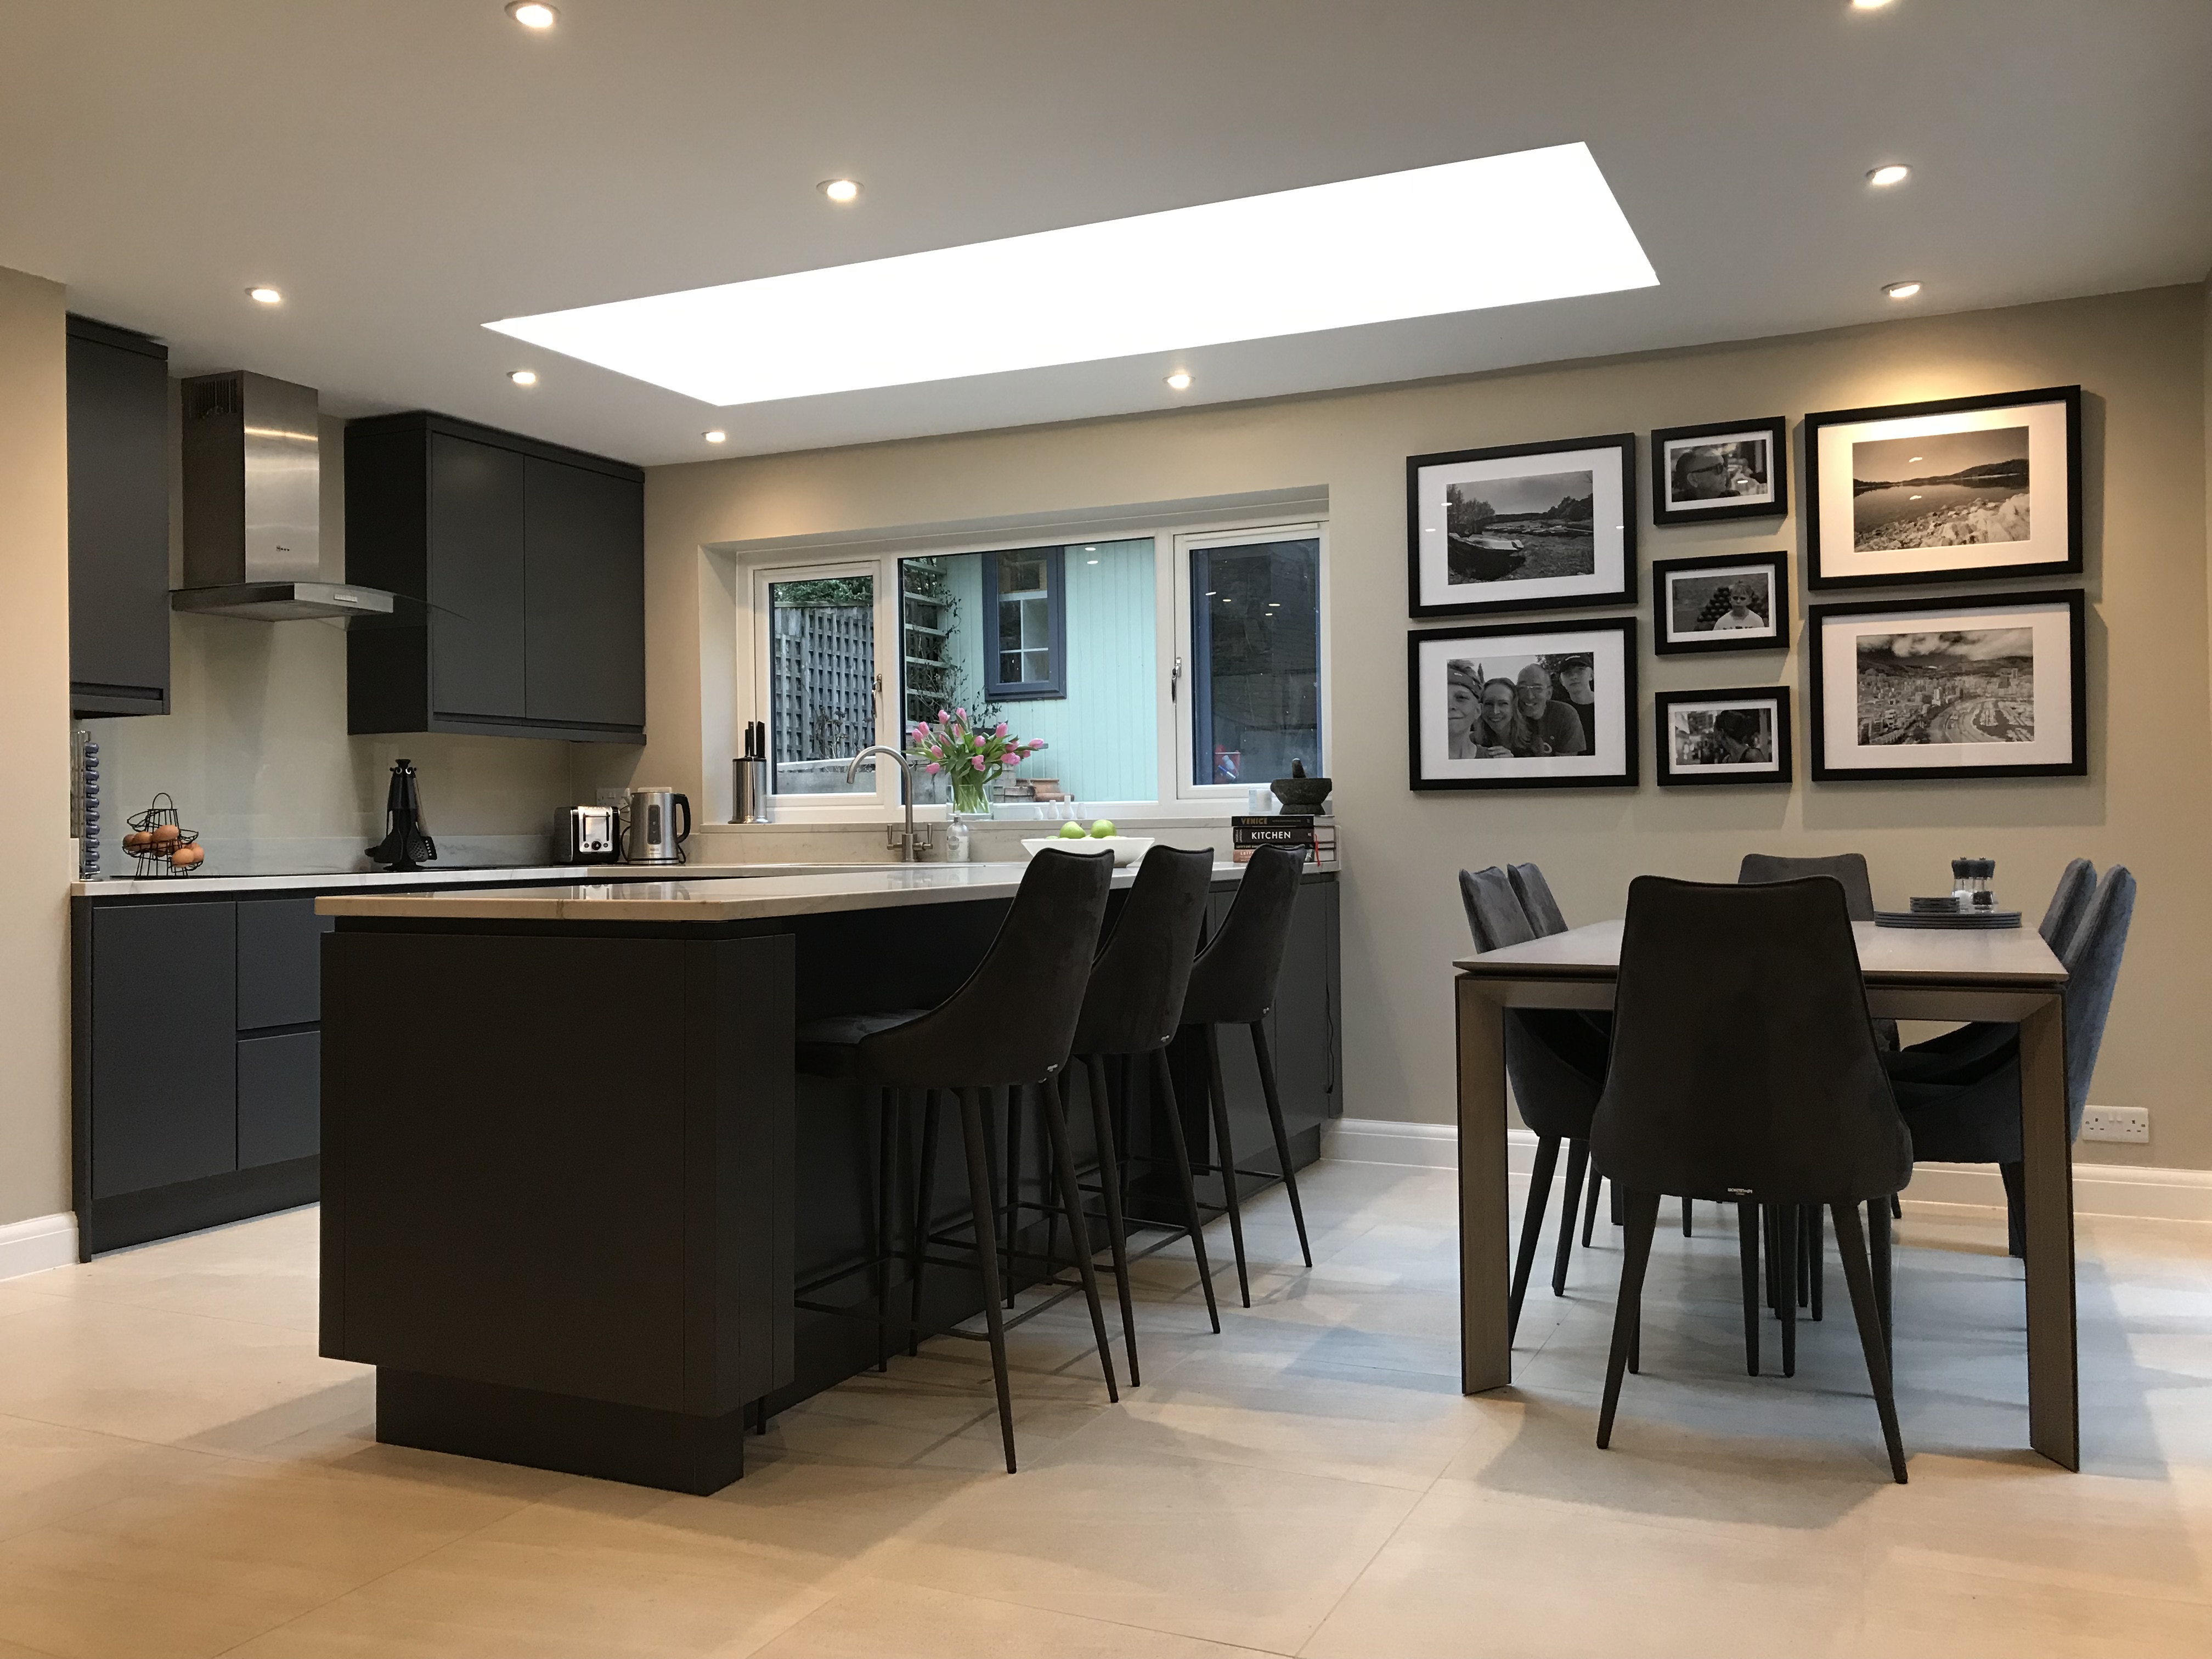 Homesmiths | Family Kitchen Diners in Lindfield - HomeSmiths - Interior ...